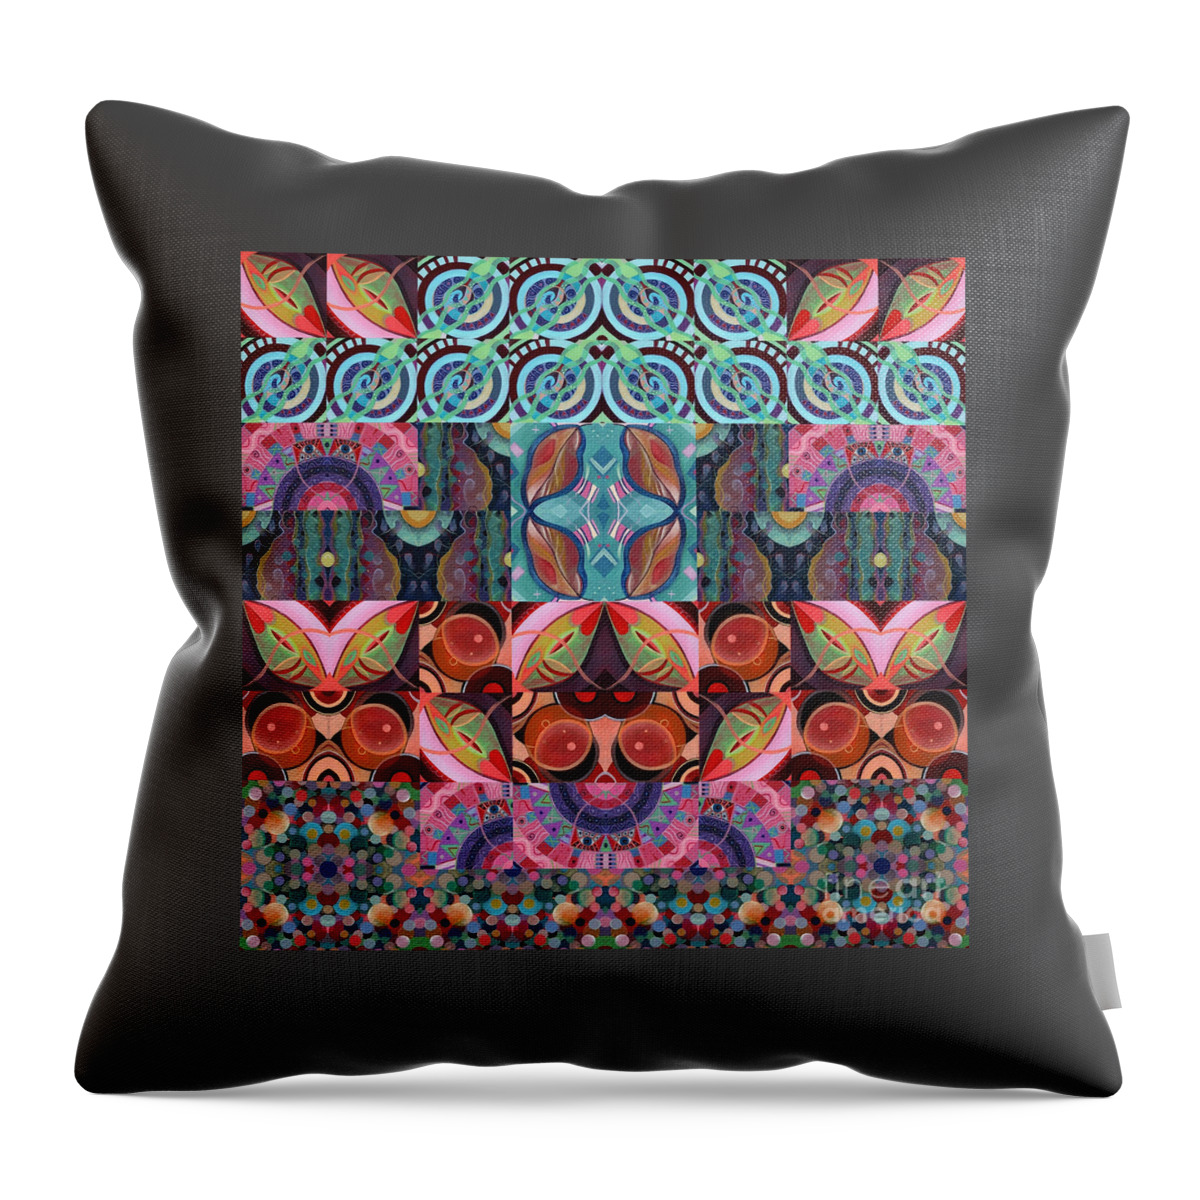 The Joy Of Design Mandala Series Puzzle 7 Arrangement 3 By Helena Tiainen Throw Pillow featuring the mixed media The Joy of Design Mandala Series Puzzle 7 Arrangement 3 by Helena Tiainen